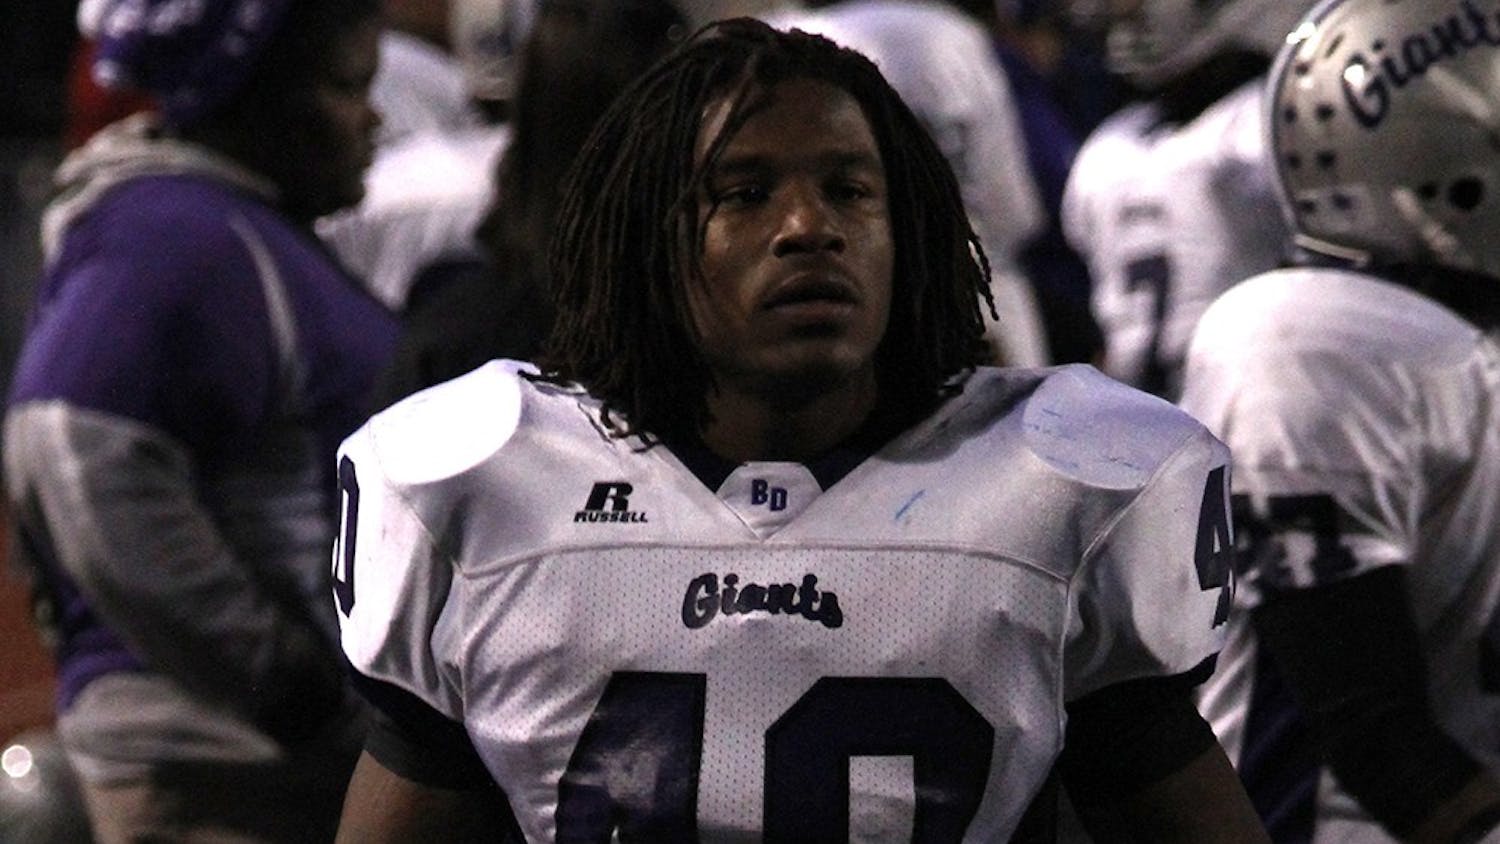 Antonio Allen became the hope of his district as the star of the Ben Davis High School football team and growing up in one of the most impoverished ares of Indianapolis, but has since been charged with possession of drugs.